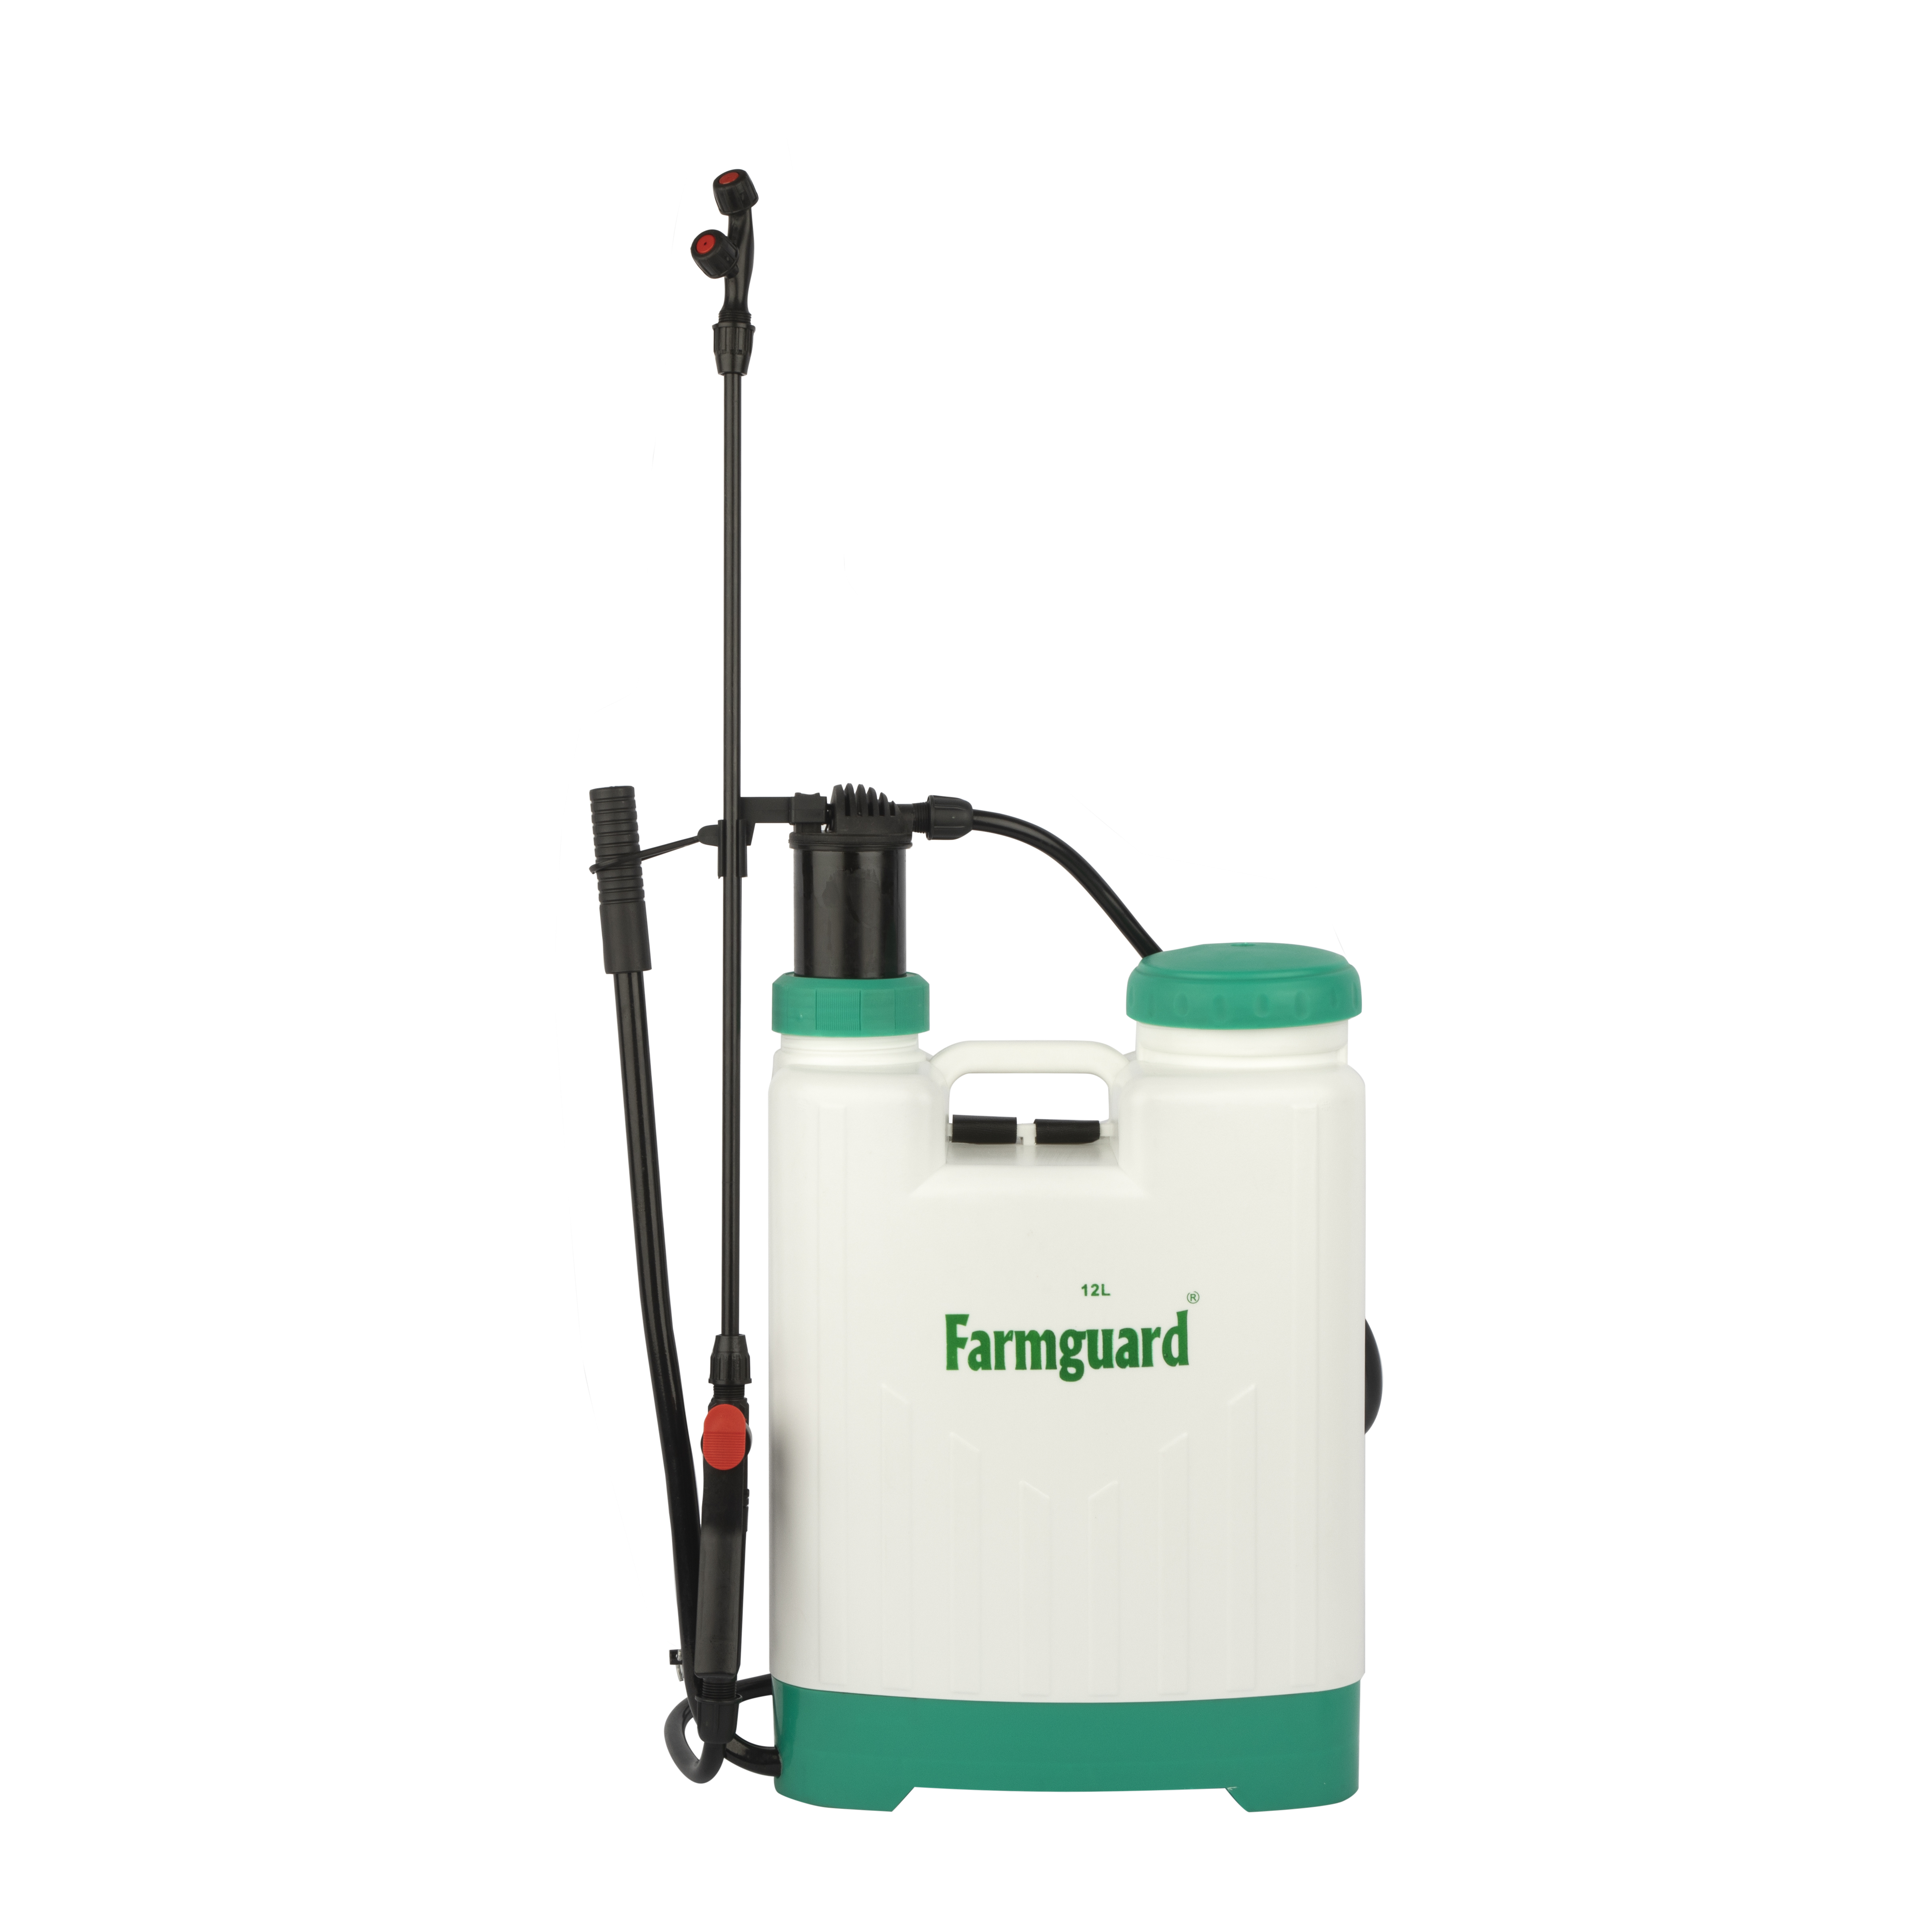 Agricultural sprayer price and purchase knowledge